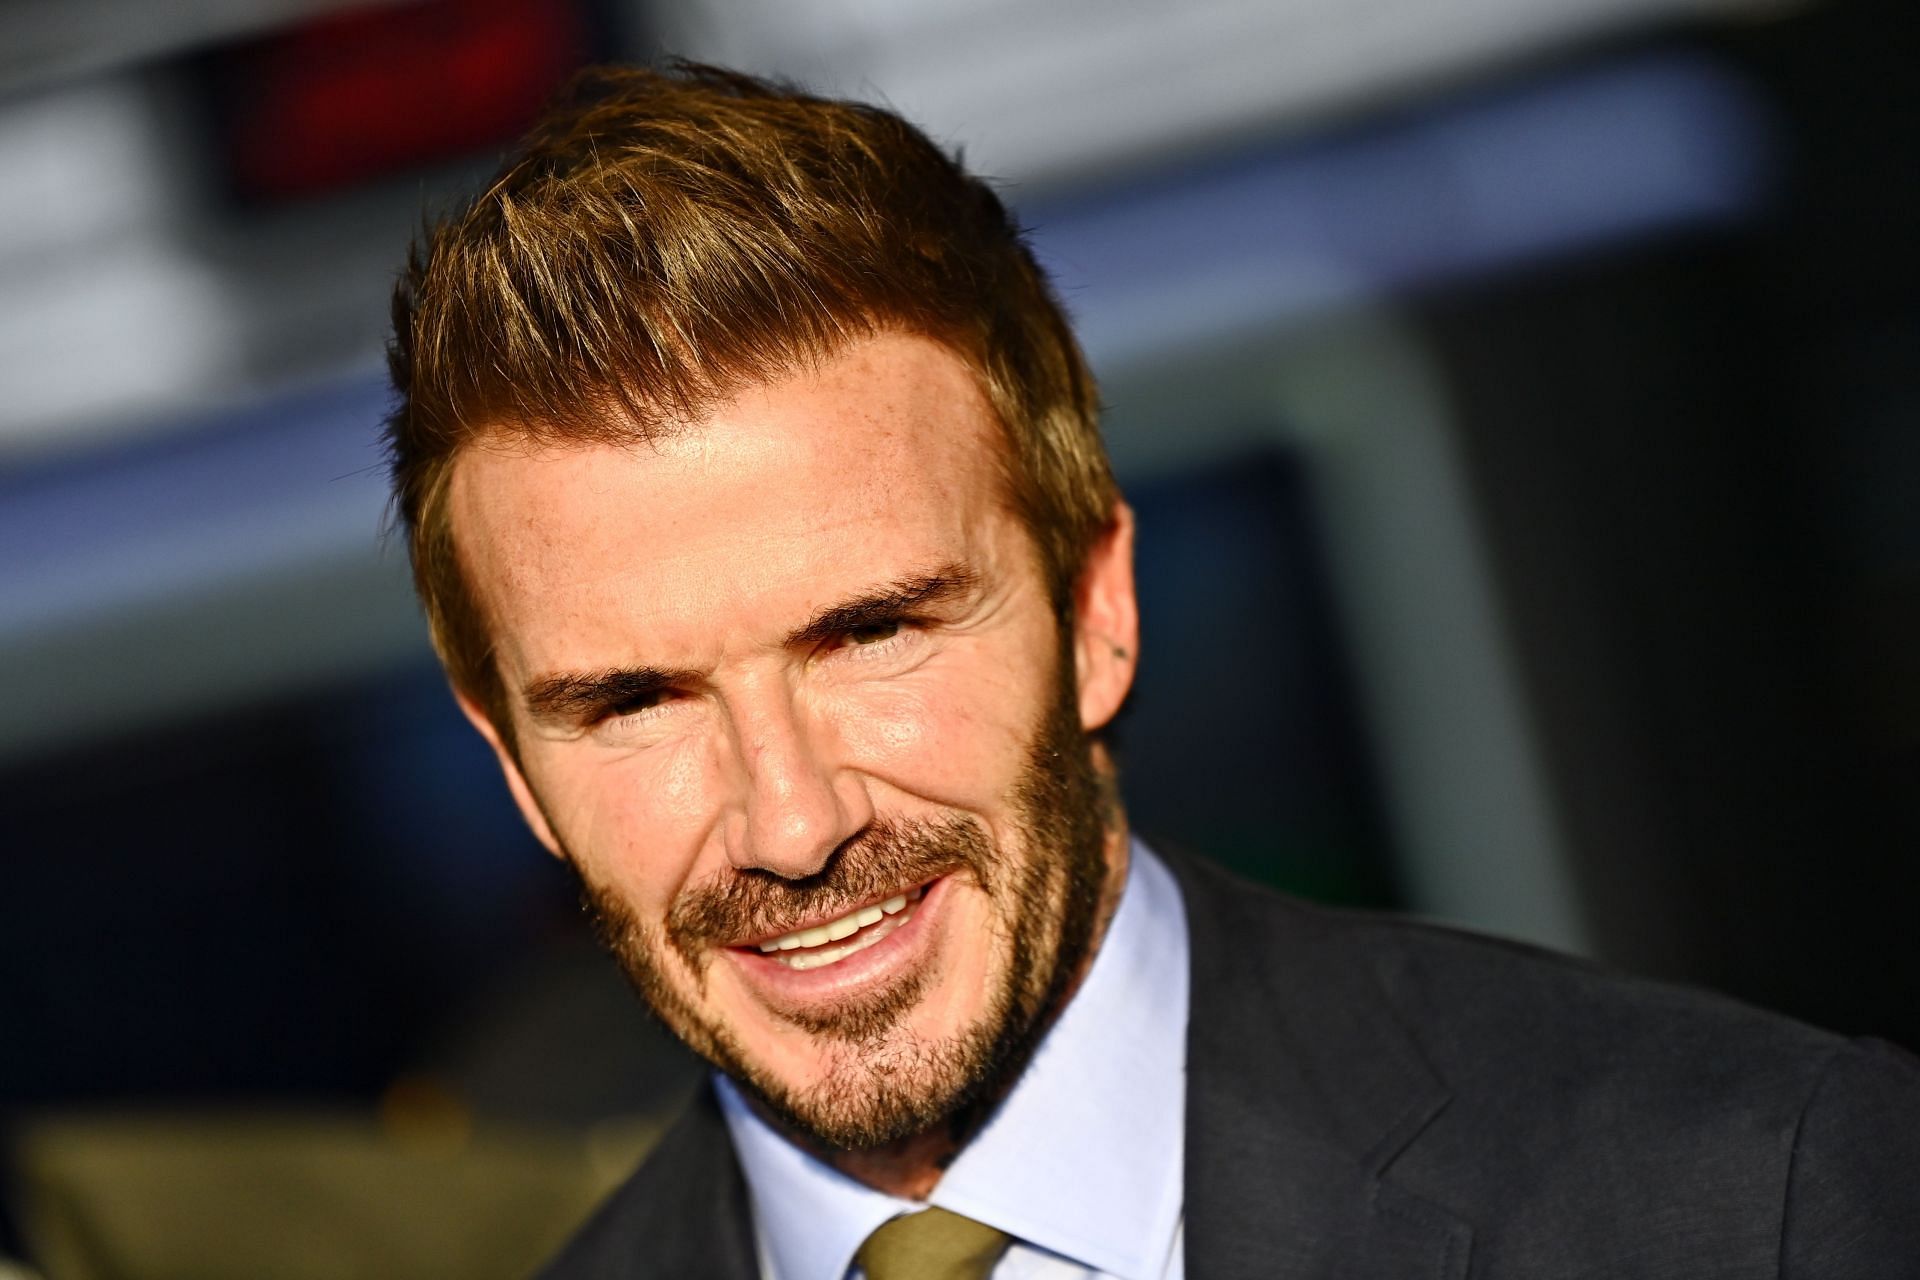 David Beckham reportedly plans to lure Lionel Messi to Inter Miami in the MLS.